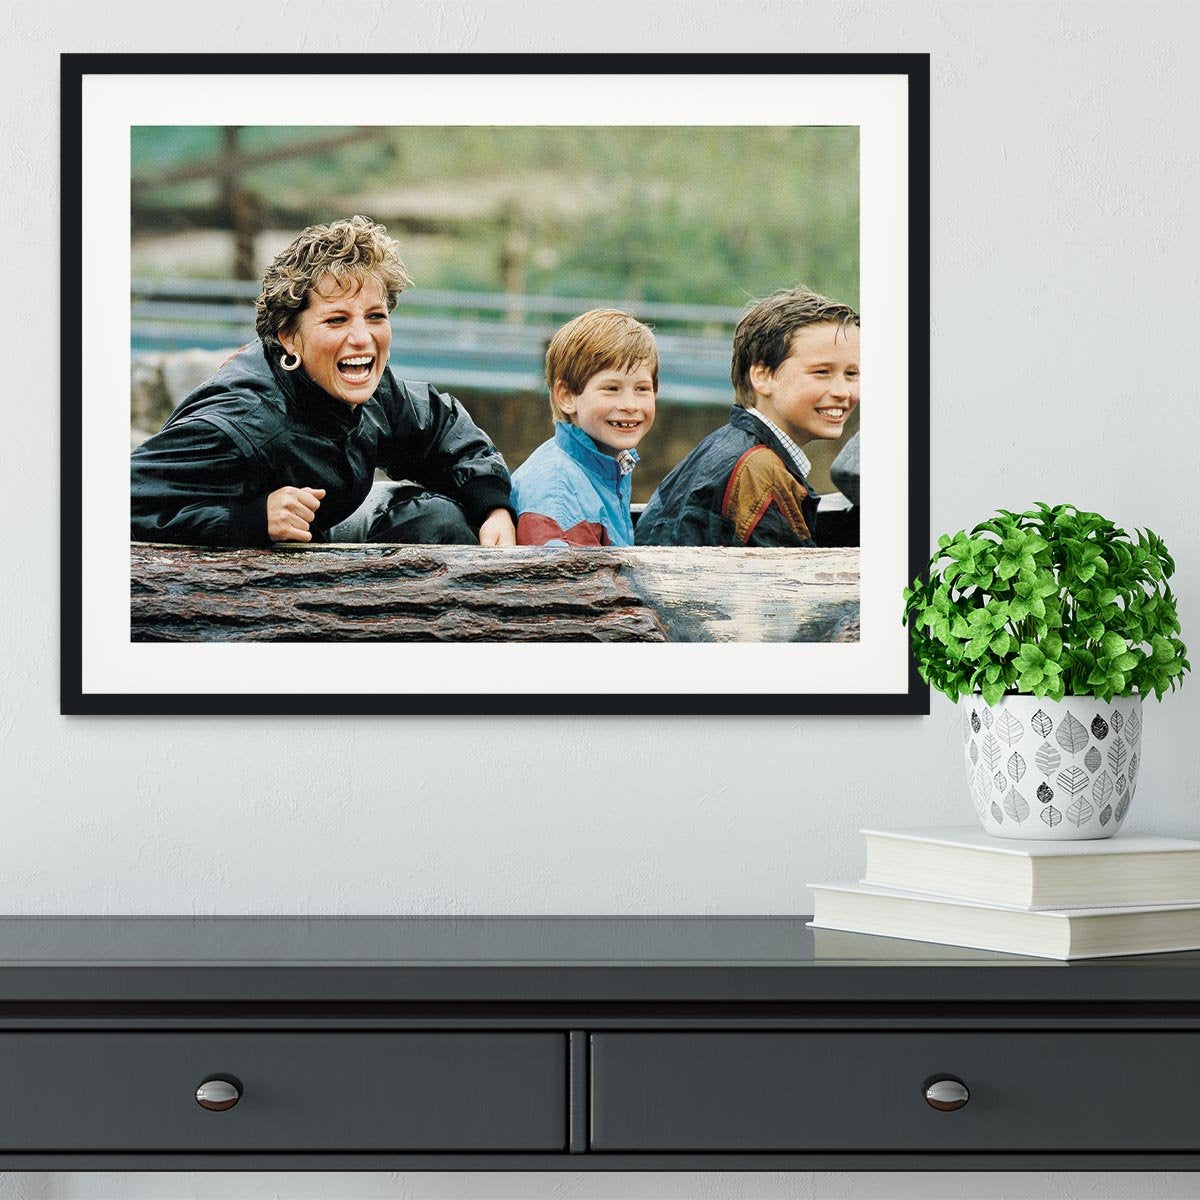 Princess Diana with Prince William and Prince Harry on ride Framed Print - Canvas Art Rocks - 1